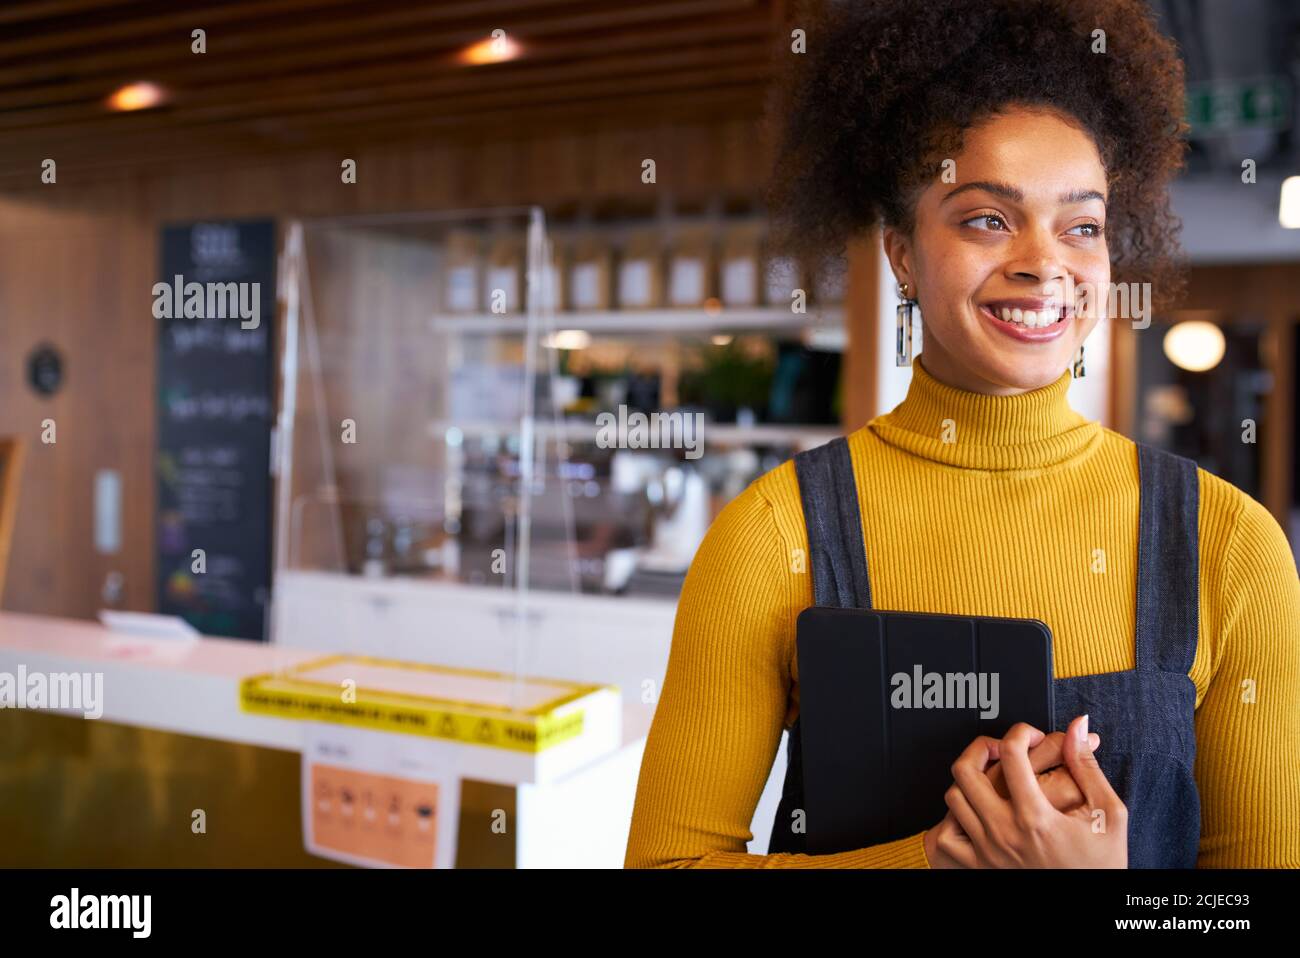 Portrait Of Female Business Owner Of Coffee Shop In Mask Using Digital Tablet During Health Pandemic Stock Photo